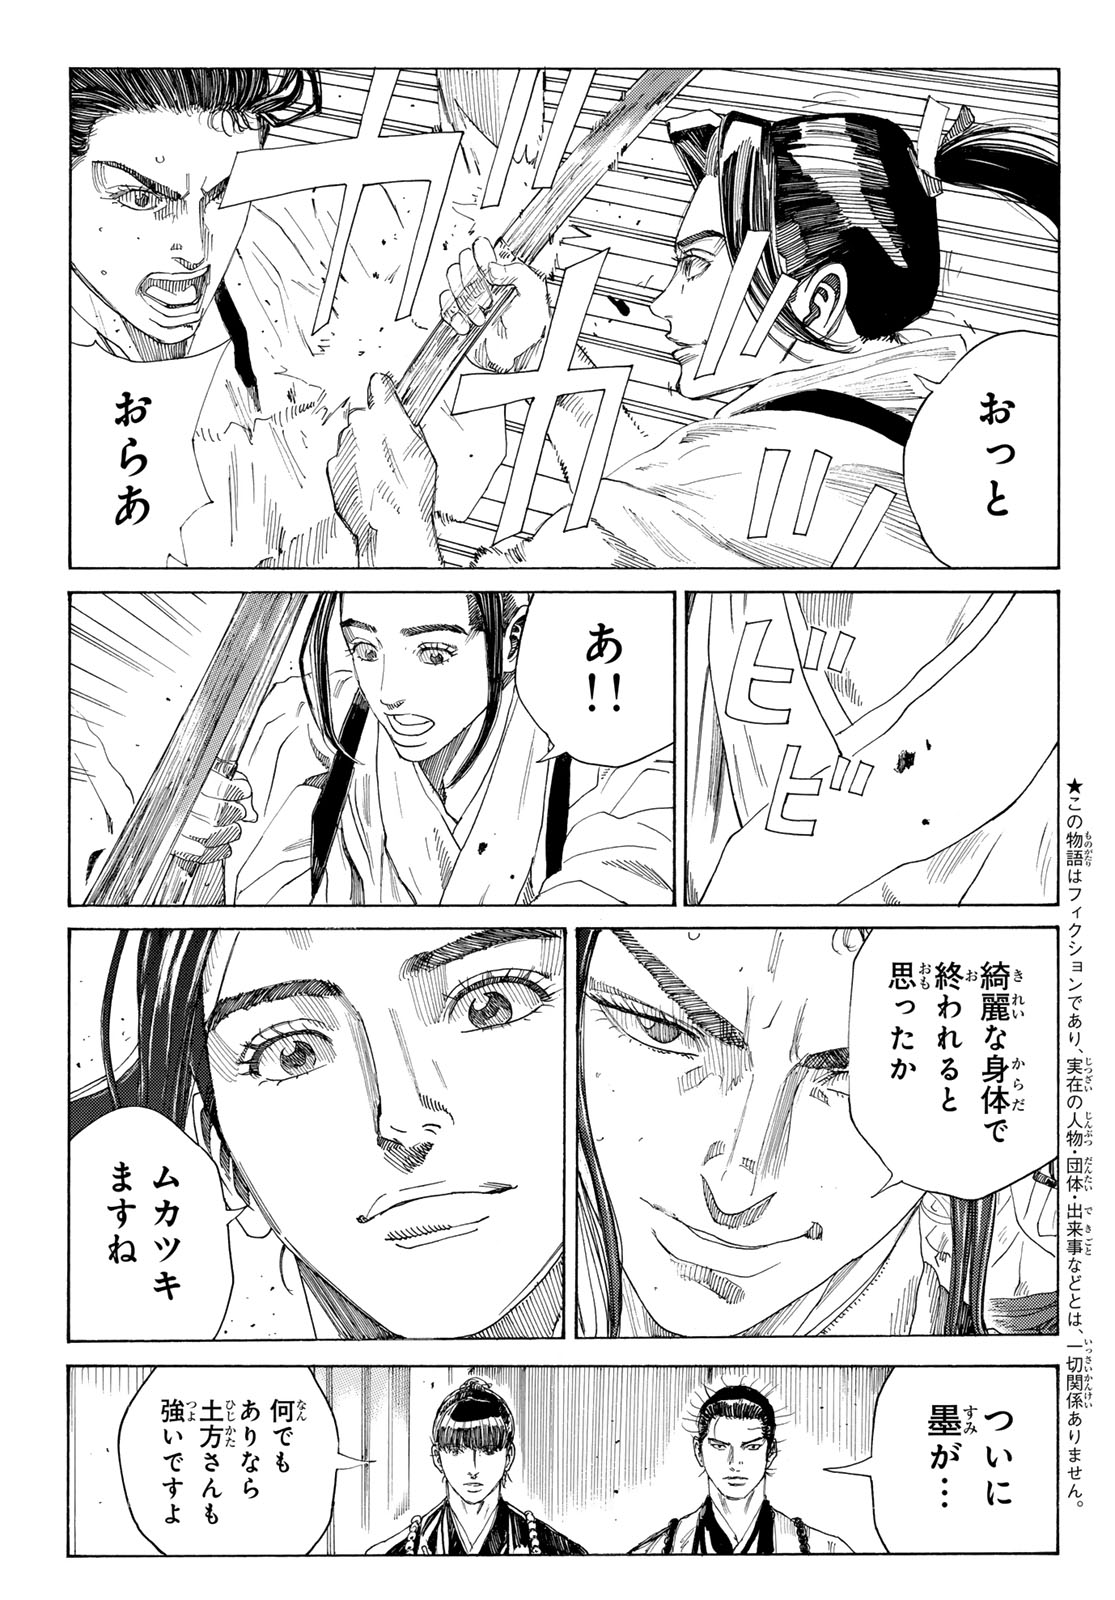 An Mo Miburo 第127話 - Page 3